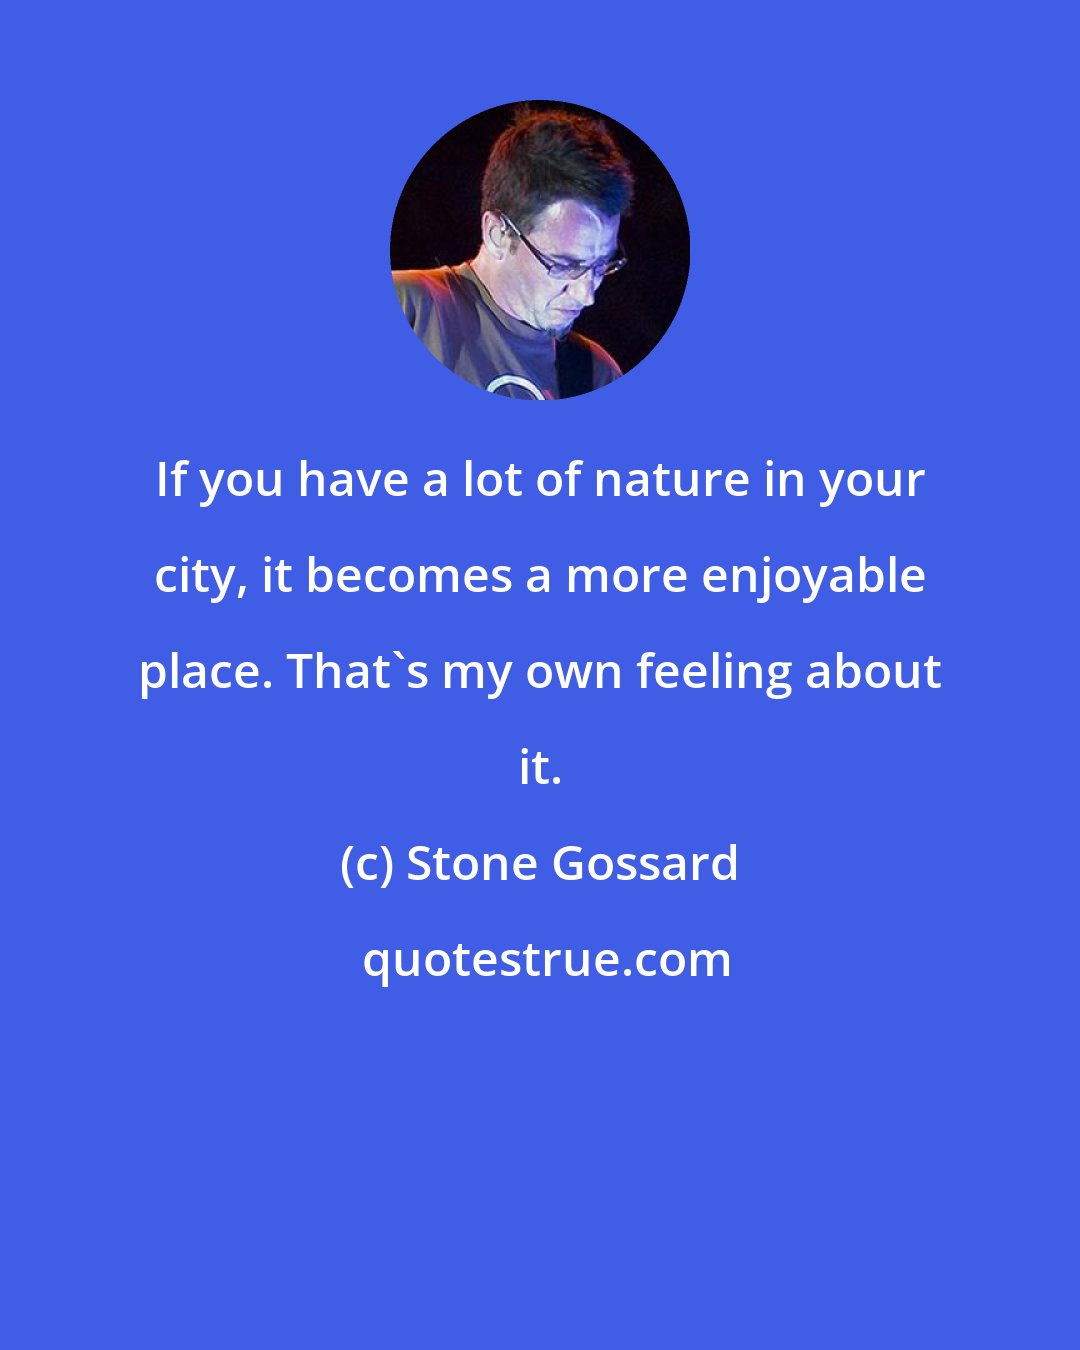 Stone Gossard: If you have a lot of nature in your city, it becomes a more enjoyable place. That's my own feeling about it.